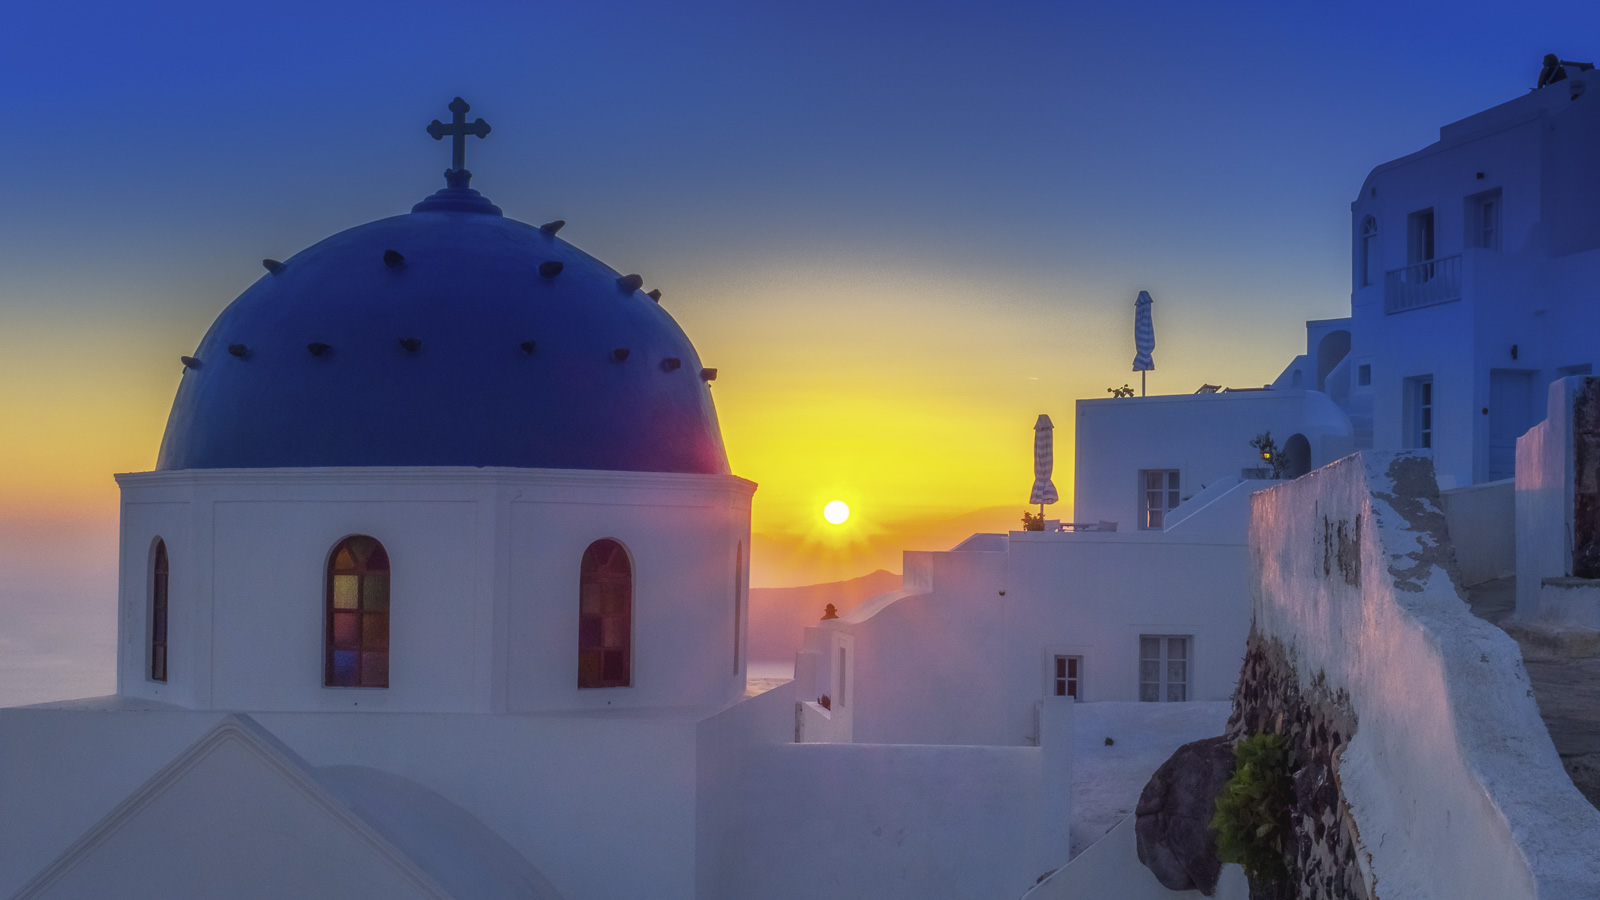 Where to stay in Santorini for Sightseeing